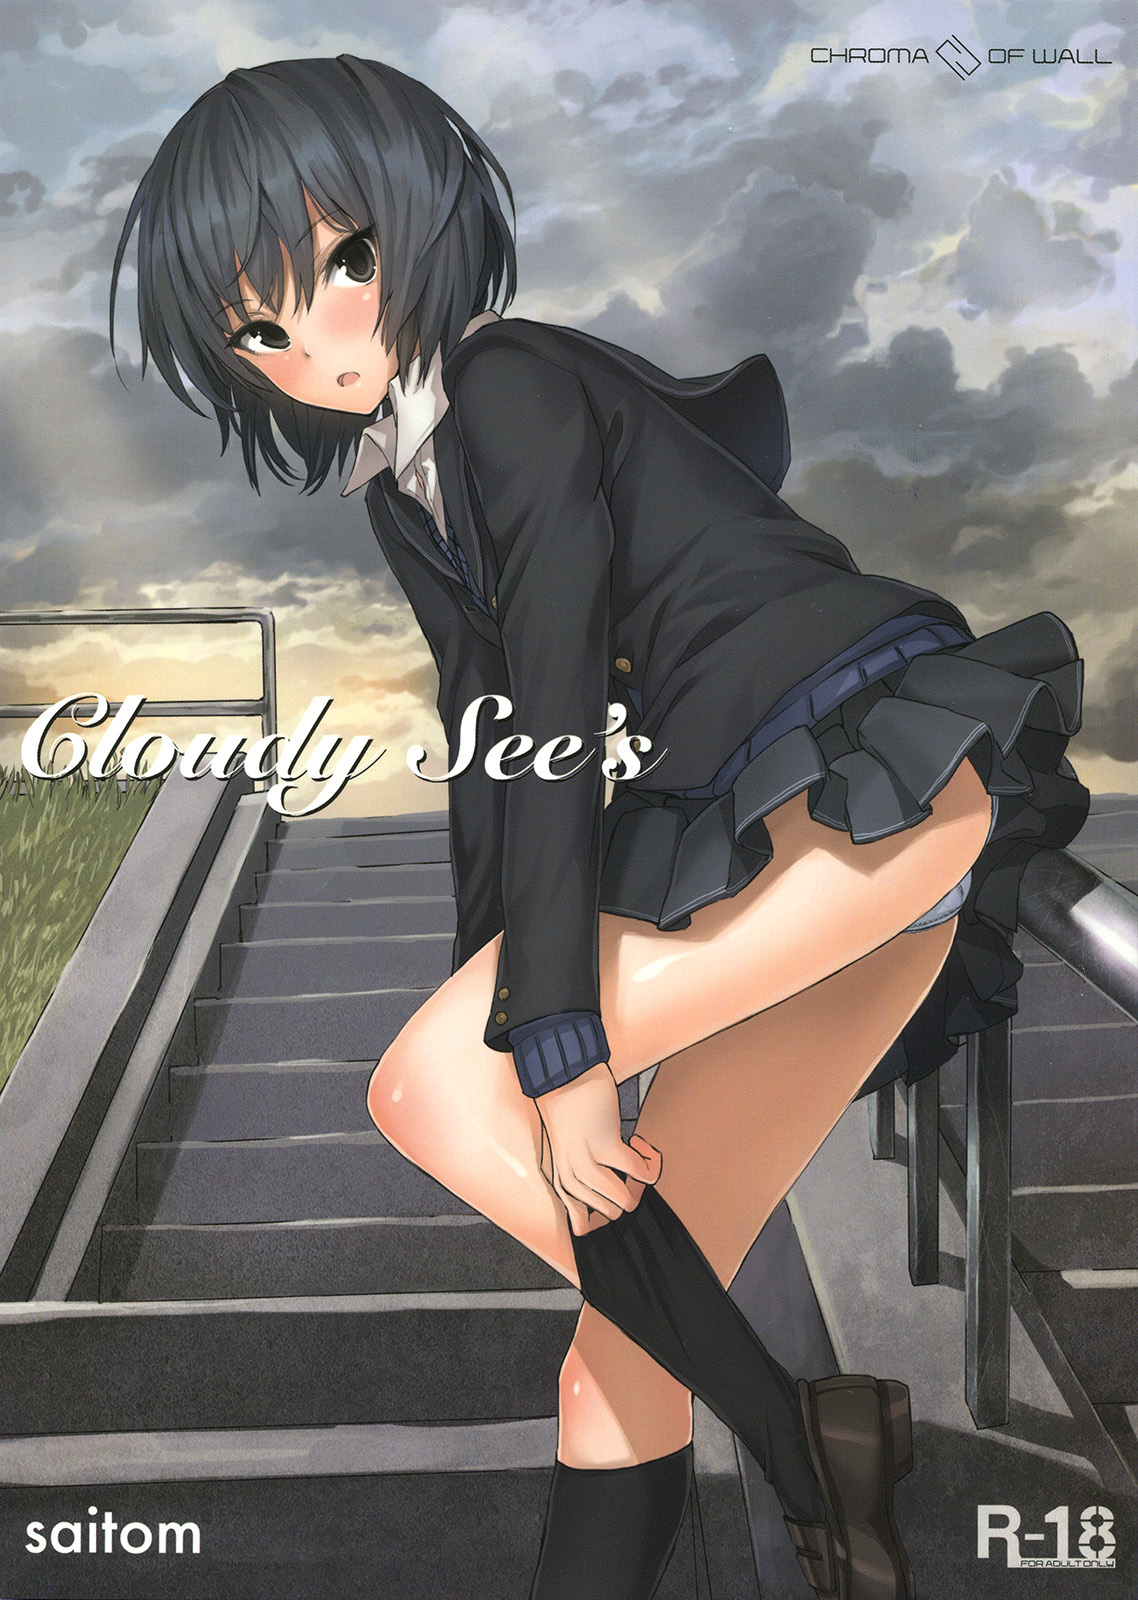 (COMIC1☆6) [Chroma of Wall (saitom)] Cloudy See's (Amagami) [Chinese] [渣渣汉化组] page 2 full